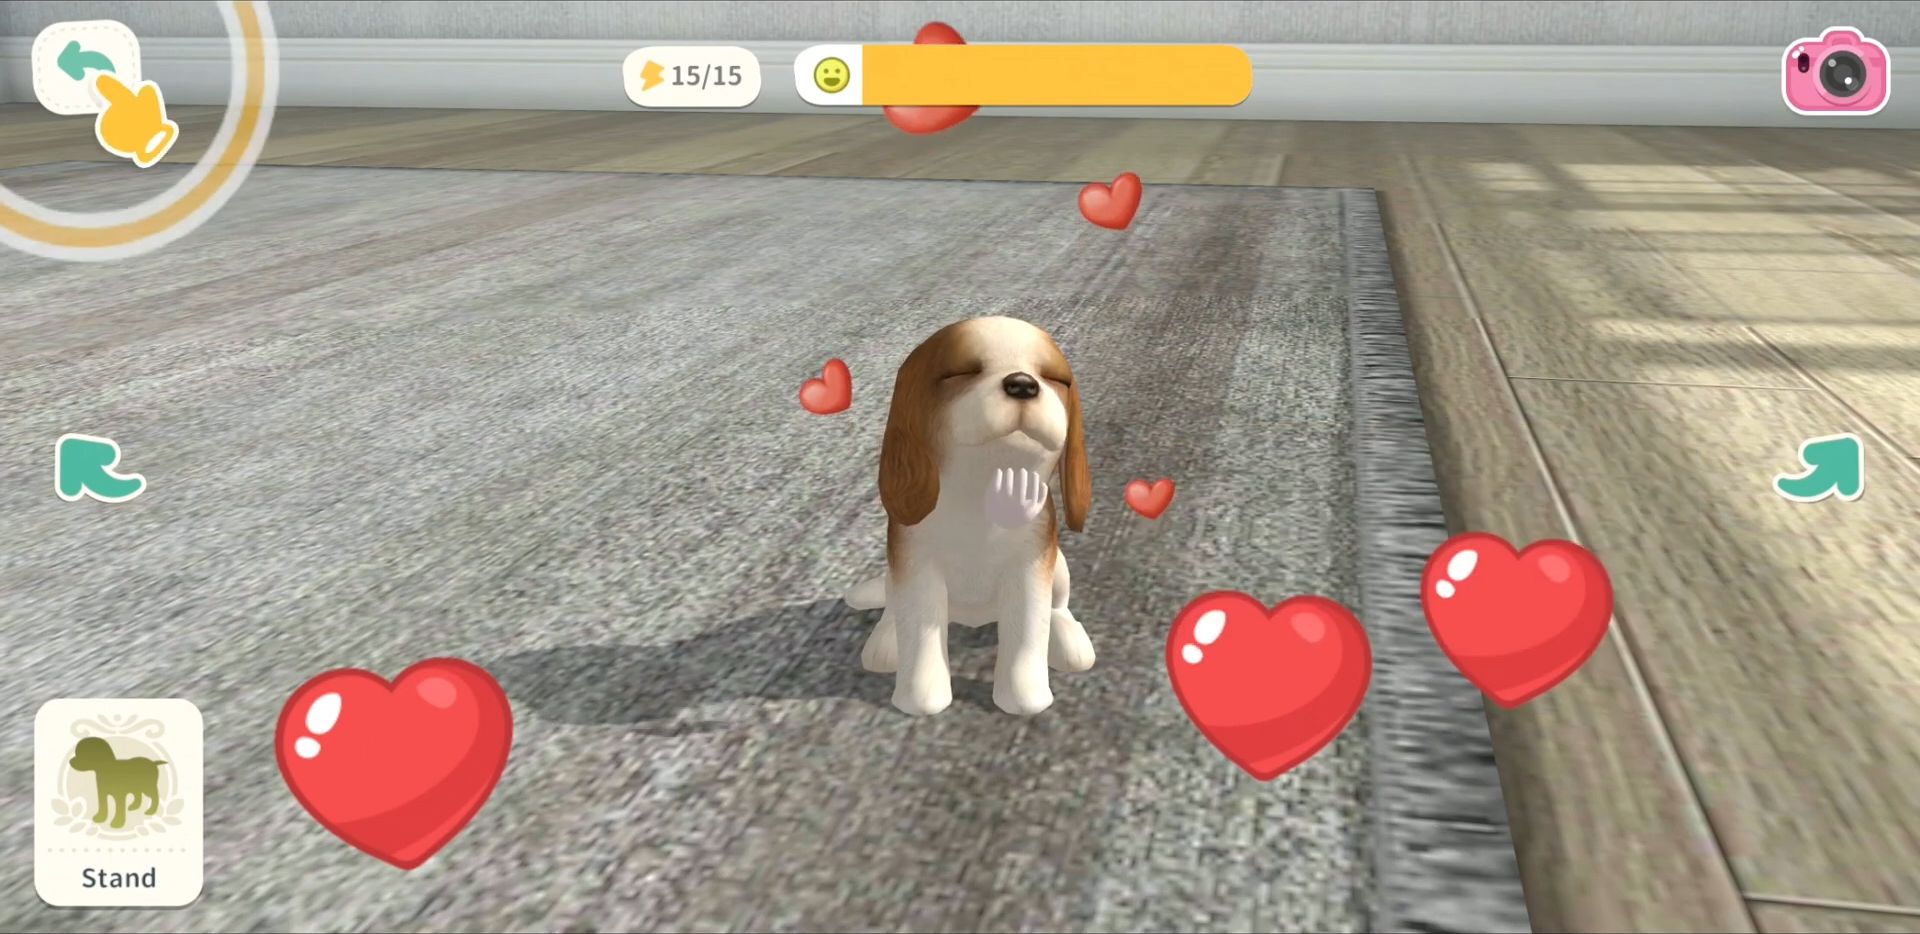 Adopt Puppies for Android